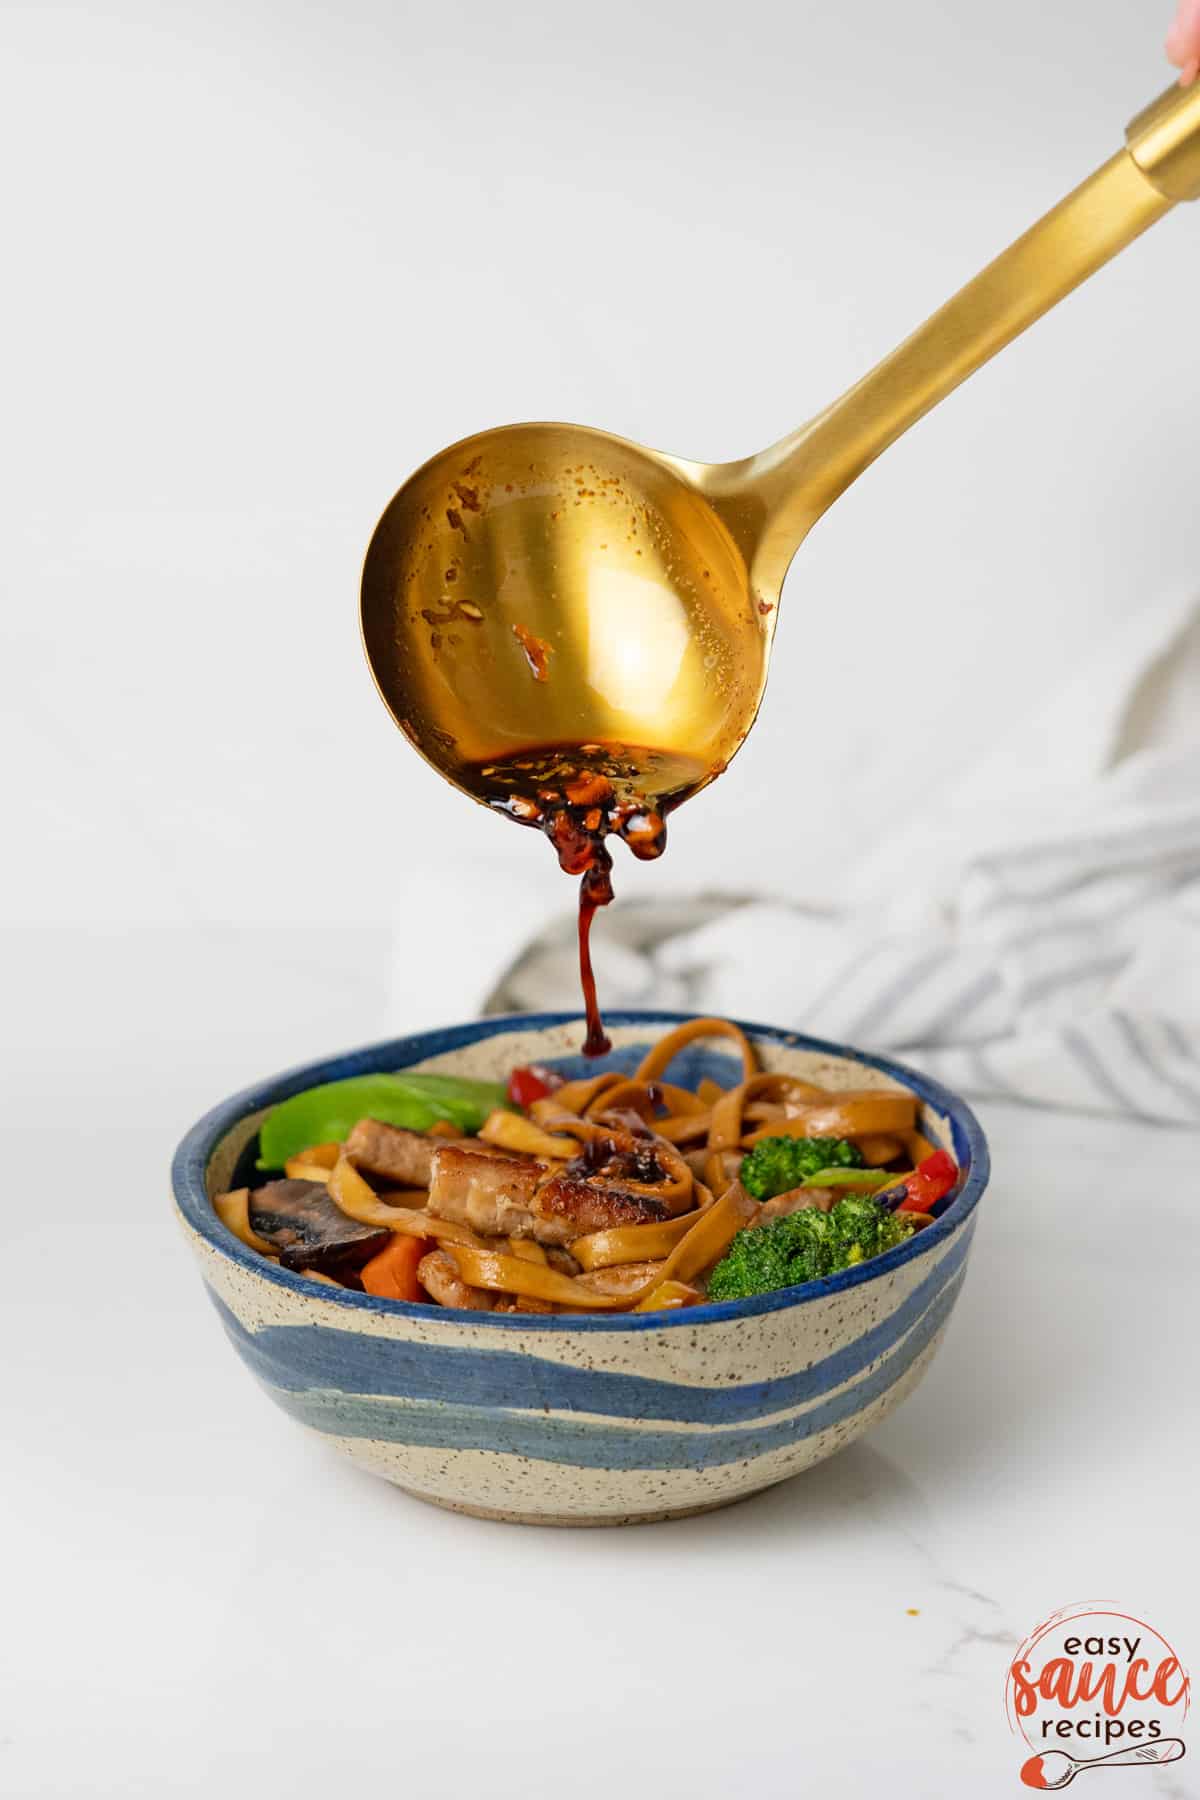 teriyaki sauce in a gold spoon pouring over bowl of food